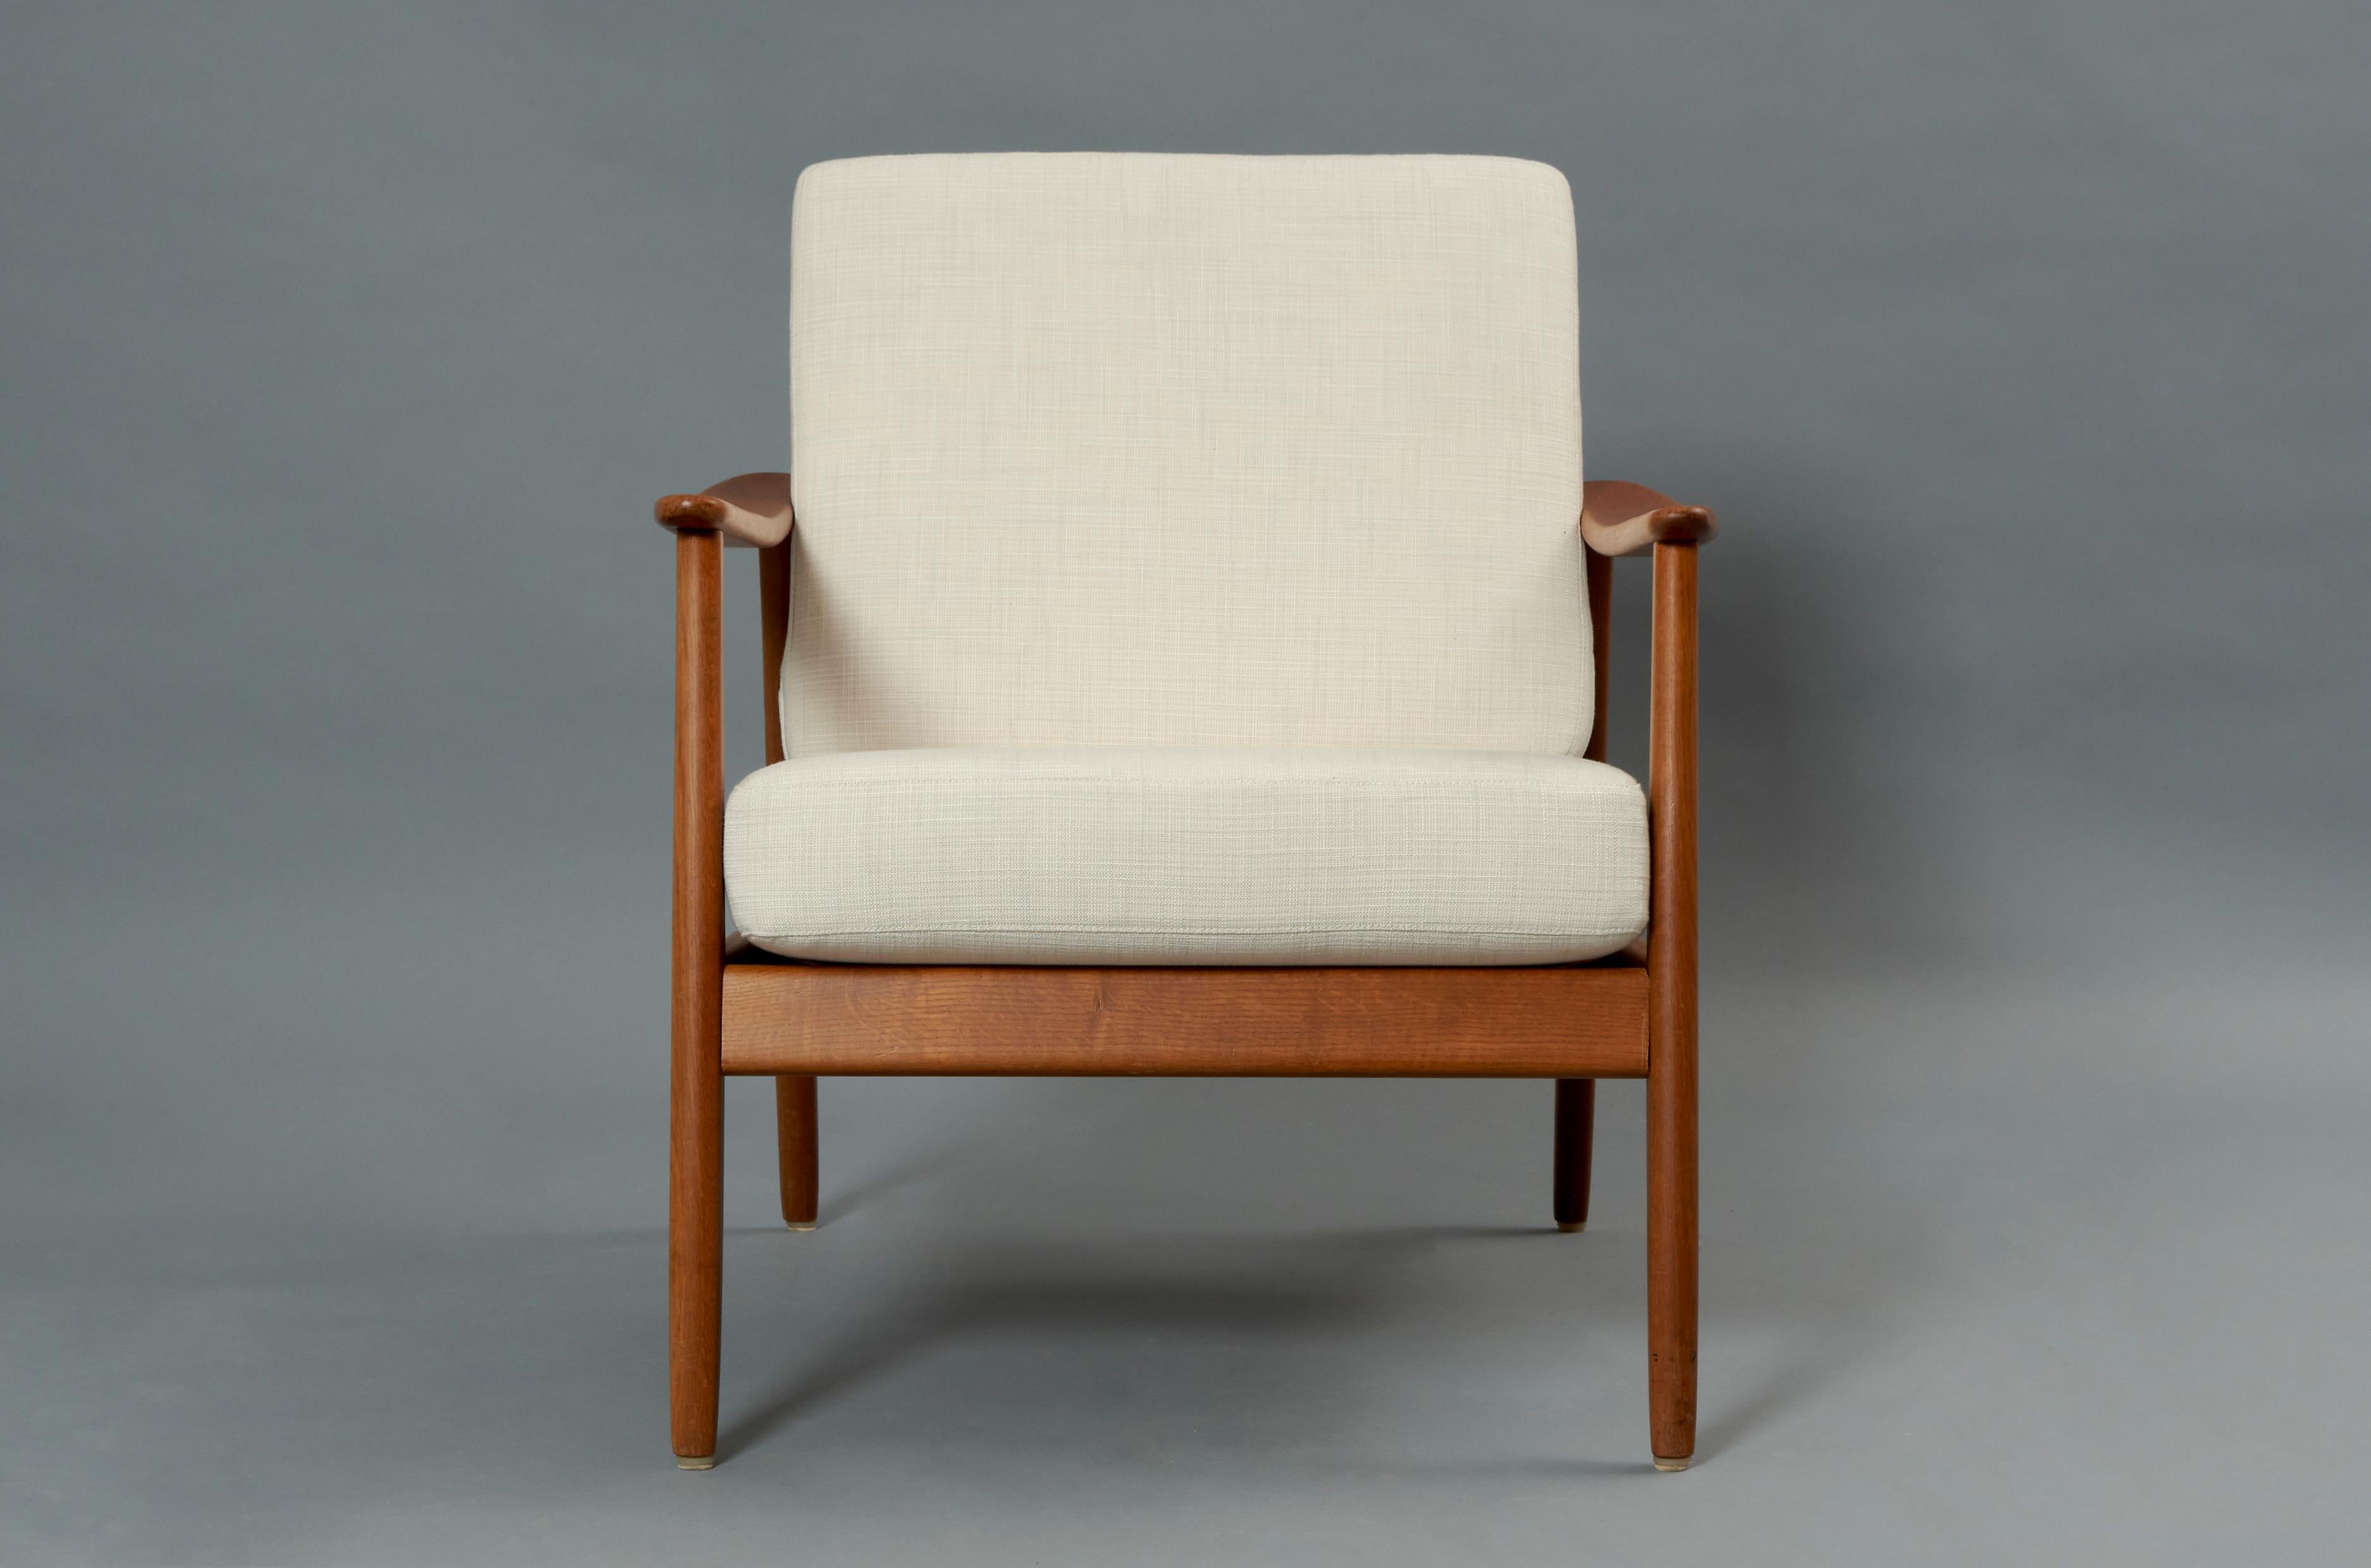 Armchair designed by Folke Ohlsson for Dux in Teak wood and Rattan. Sweden, 1960s.

Excellent restored and reupholstered condition that might present traces of time and use. 

Folke Ohlsson was a Swedish designer considered one of the most